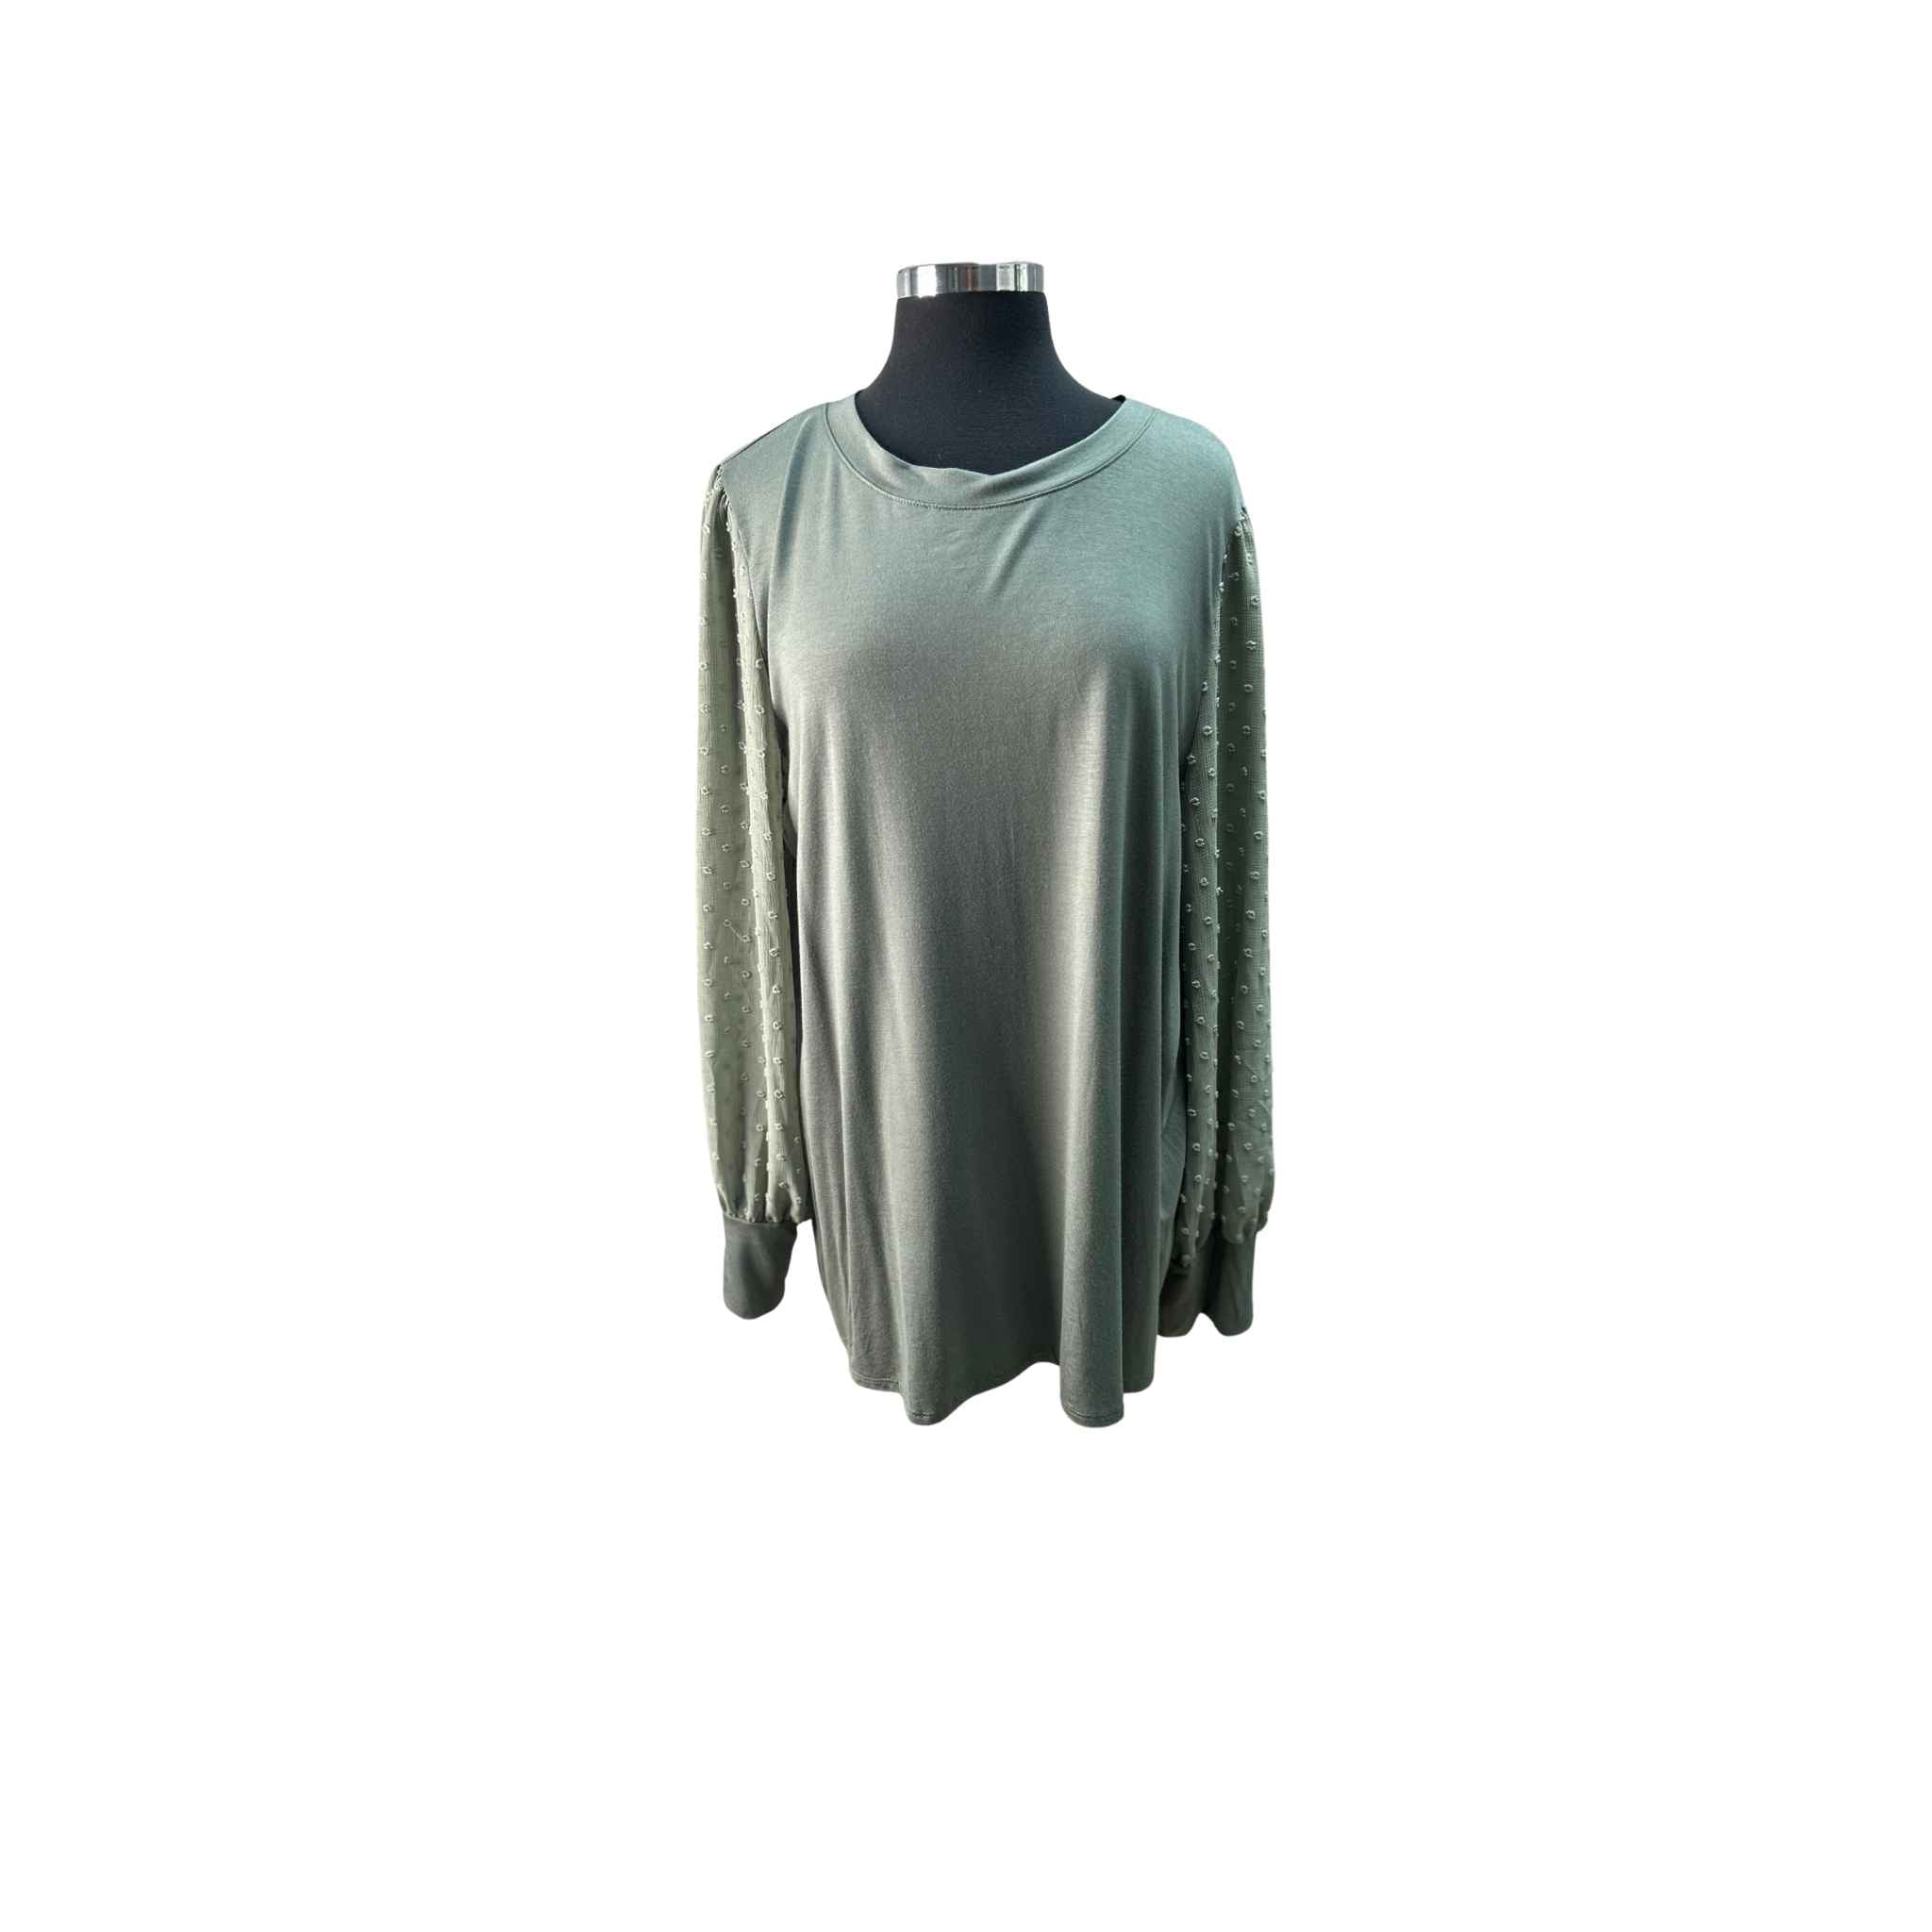 Solid Color Top With Long Chiffon Sleeves